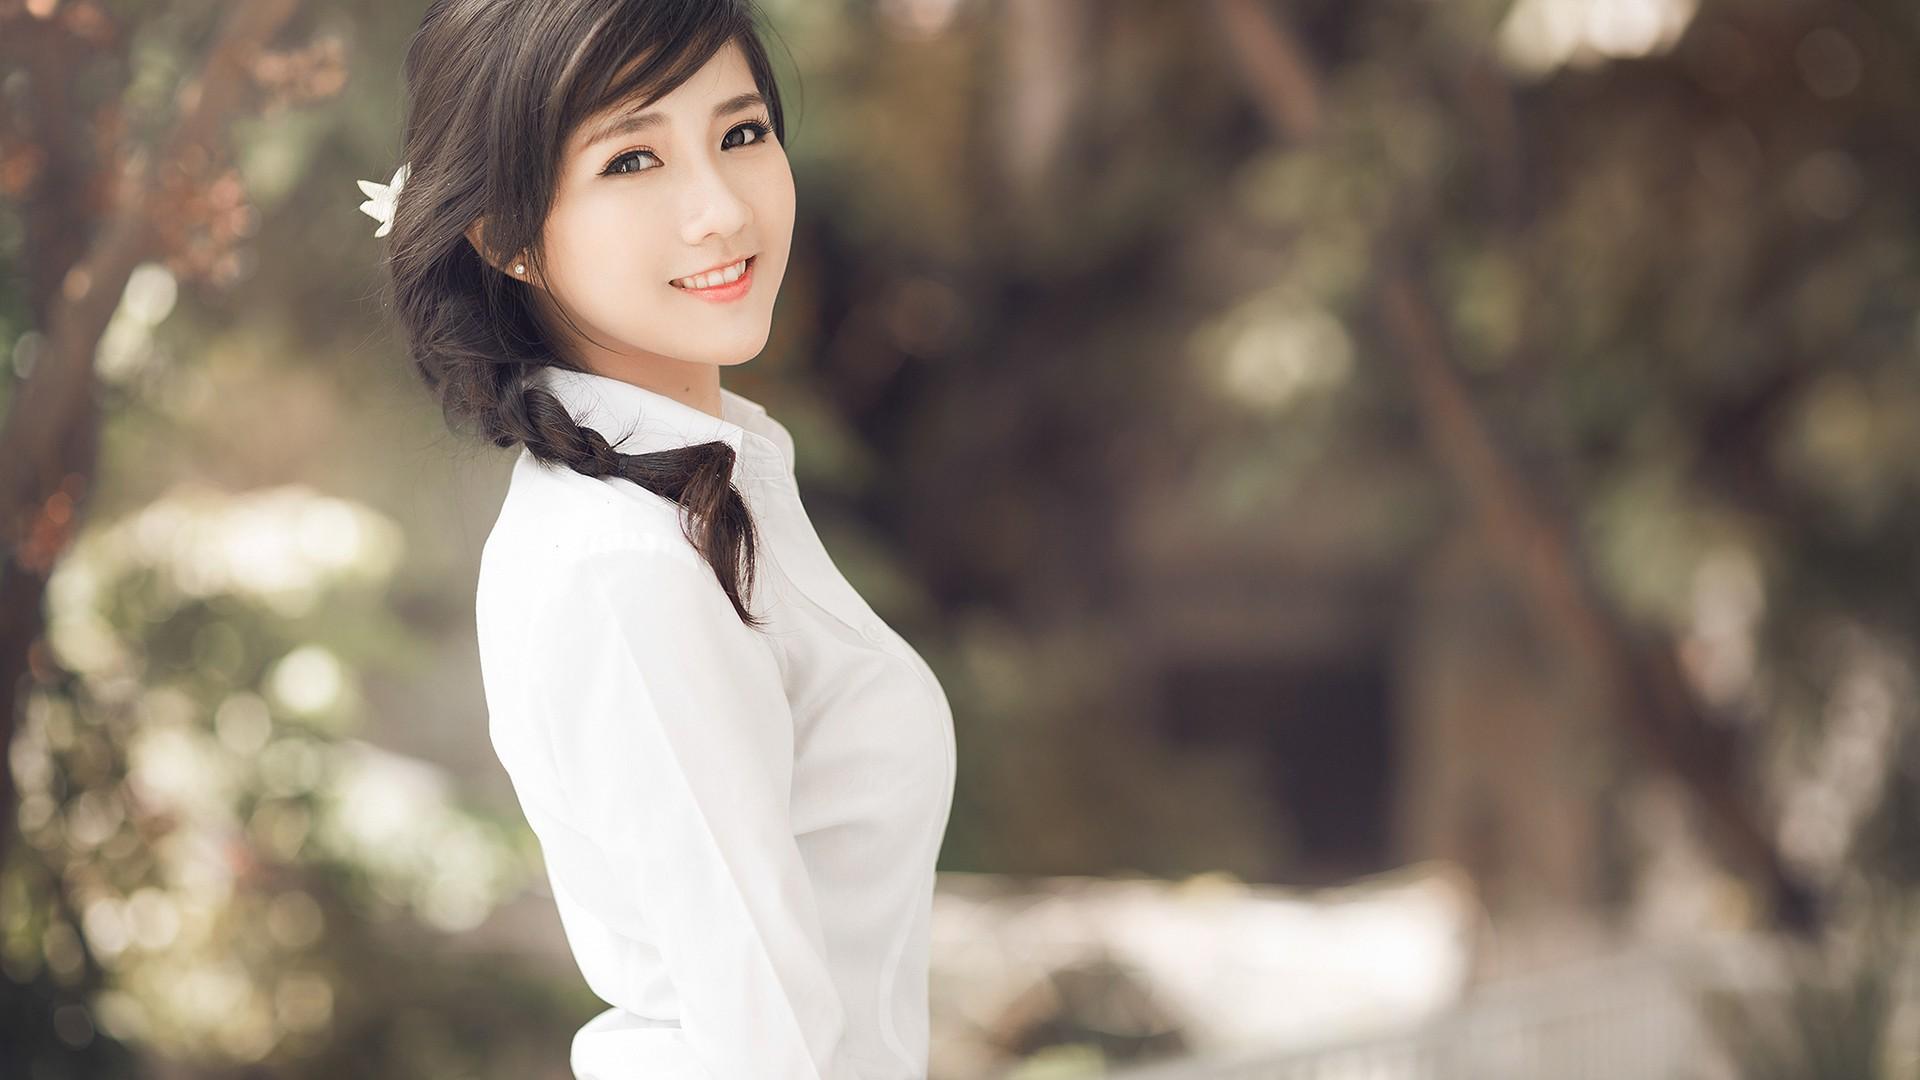 Asian Girl Wallpaper HD Background Free Download